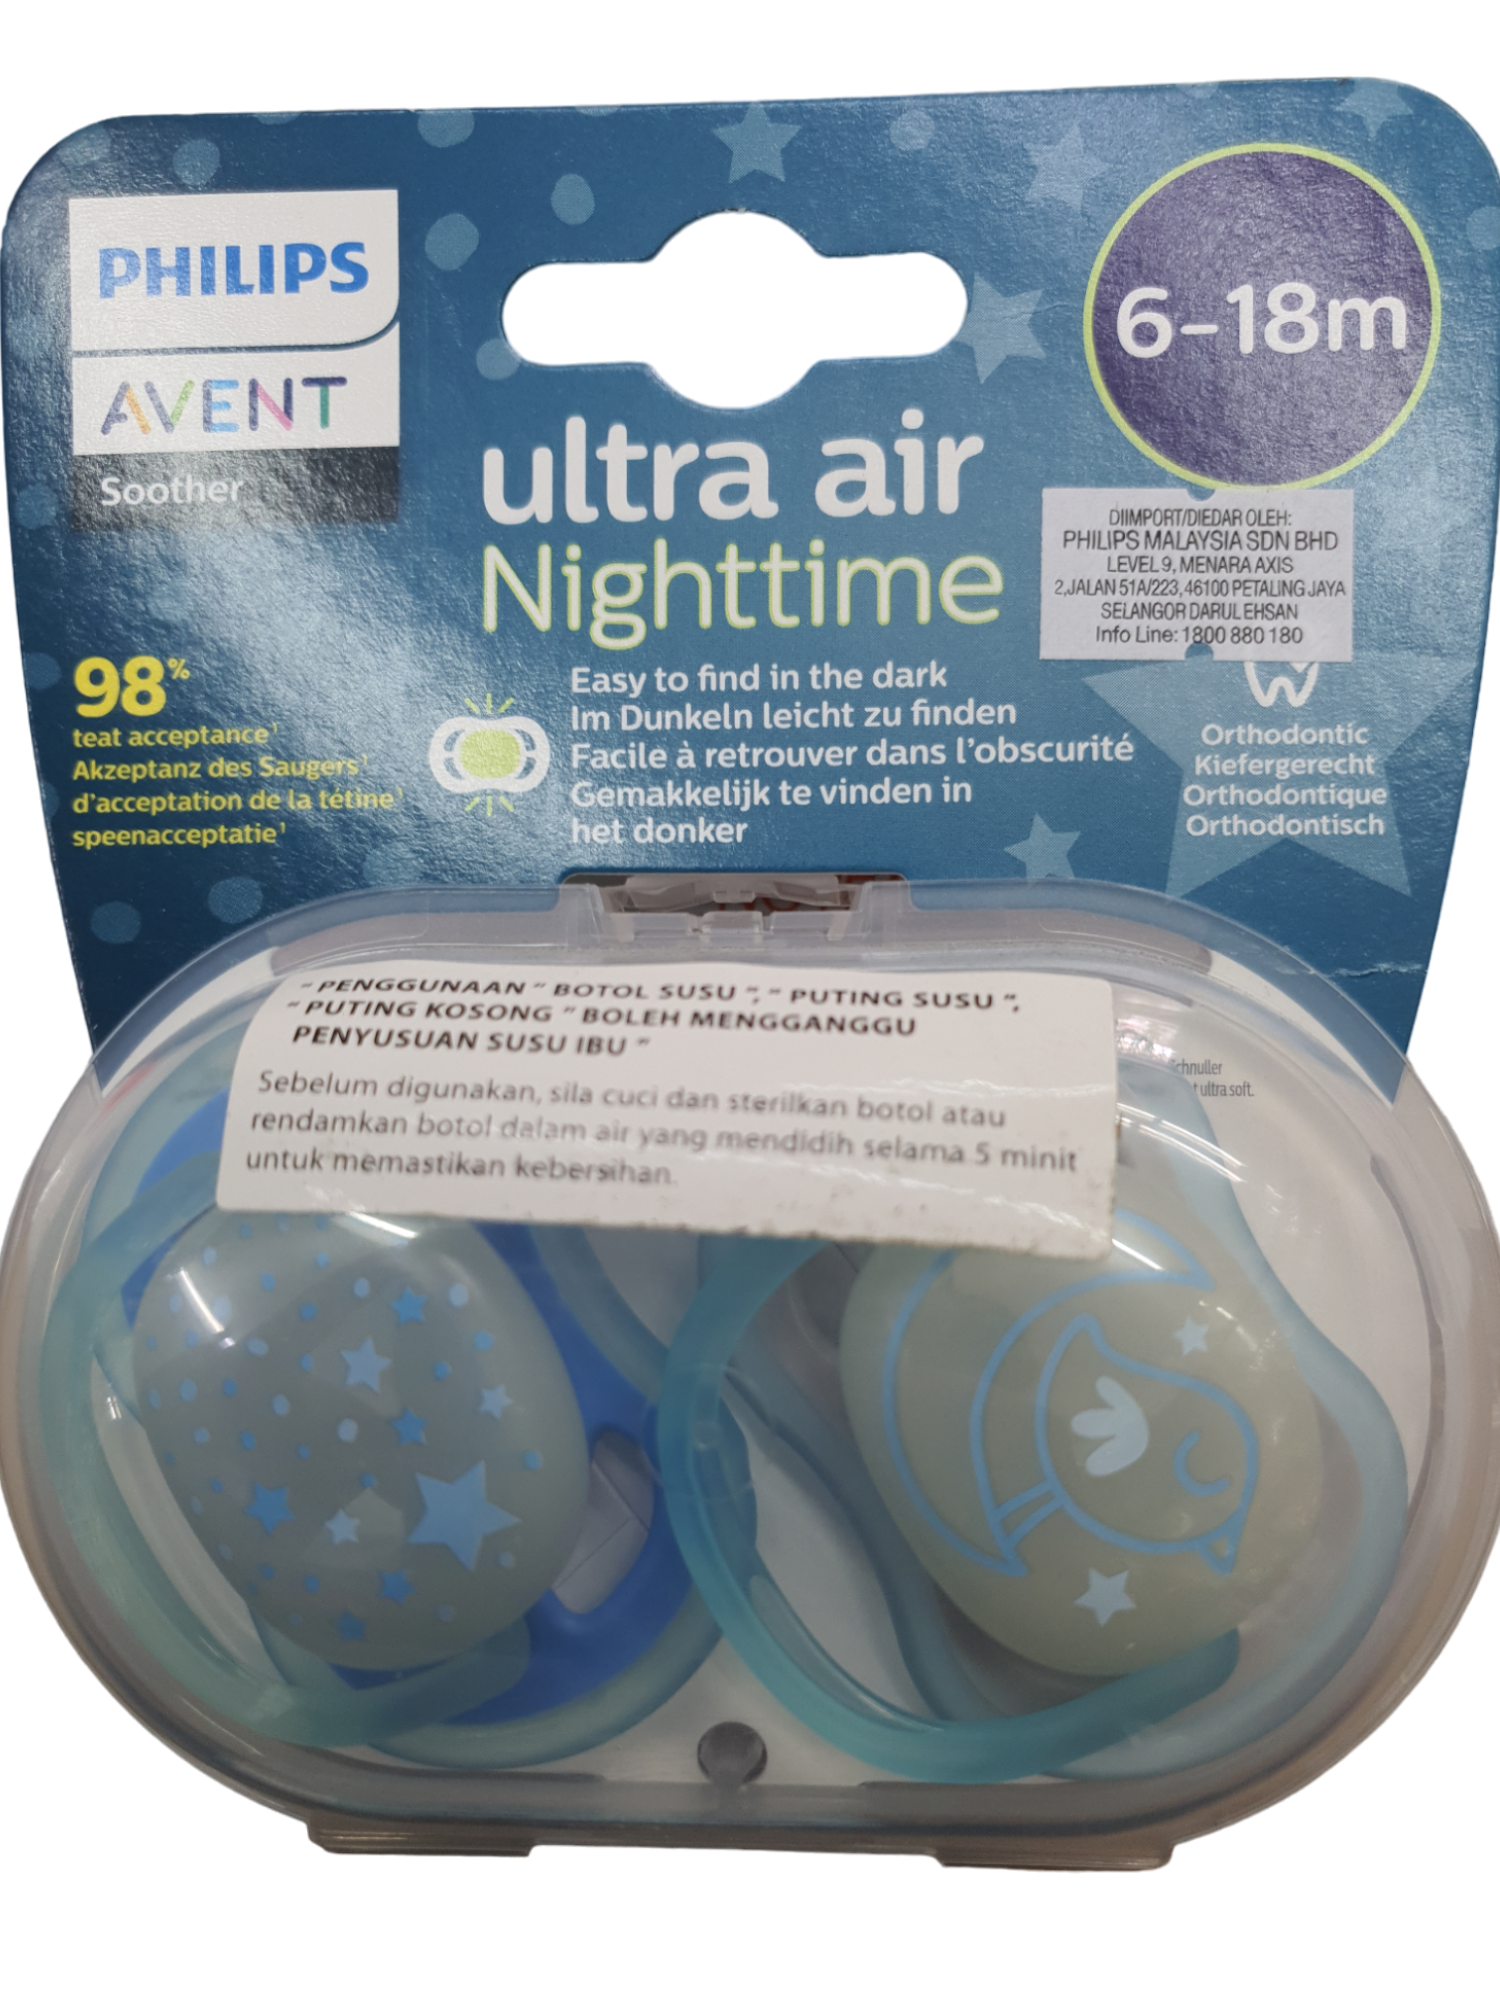 PHILIPS AVENT SOOTHER ULTRA AIR NIGHTTIME 6-18M+